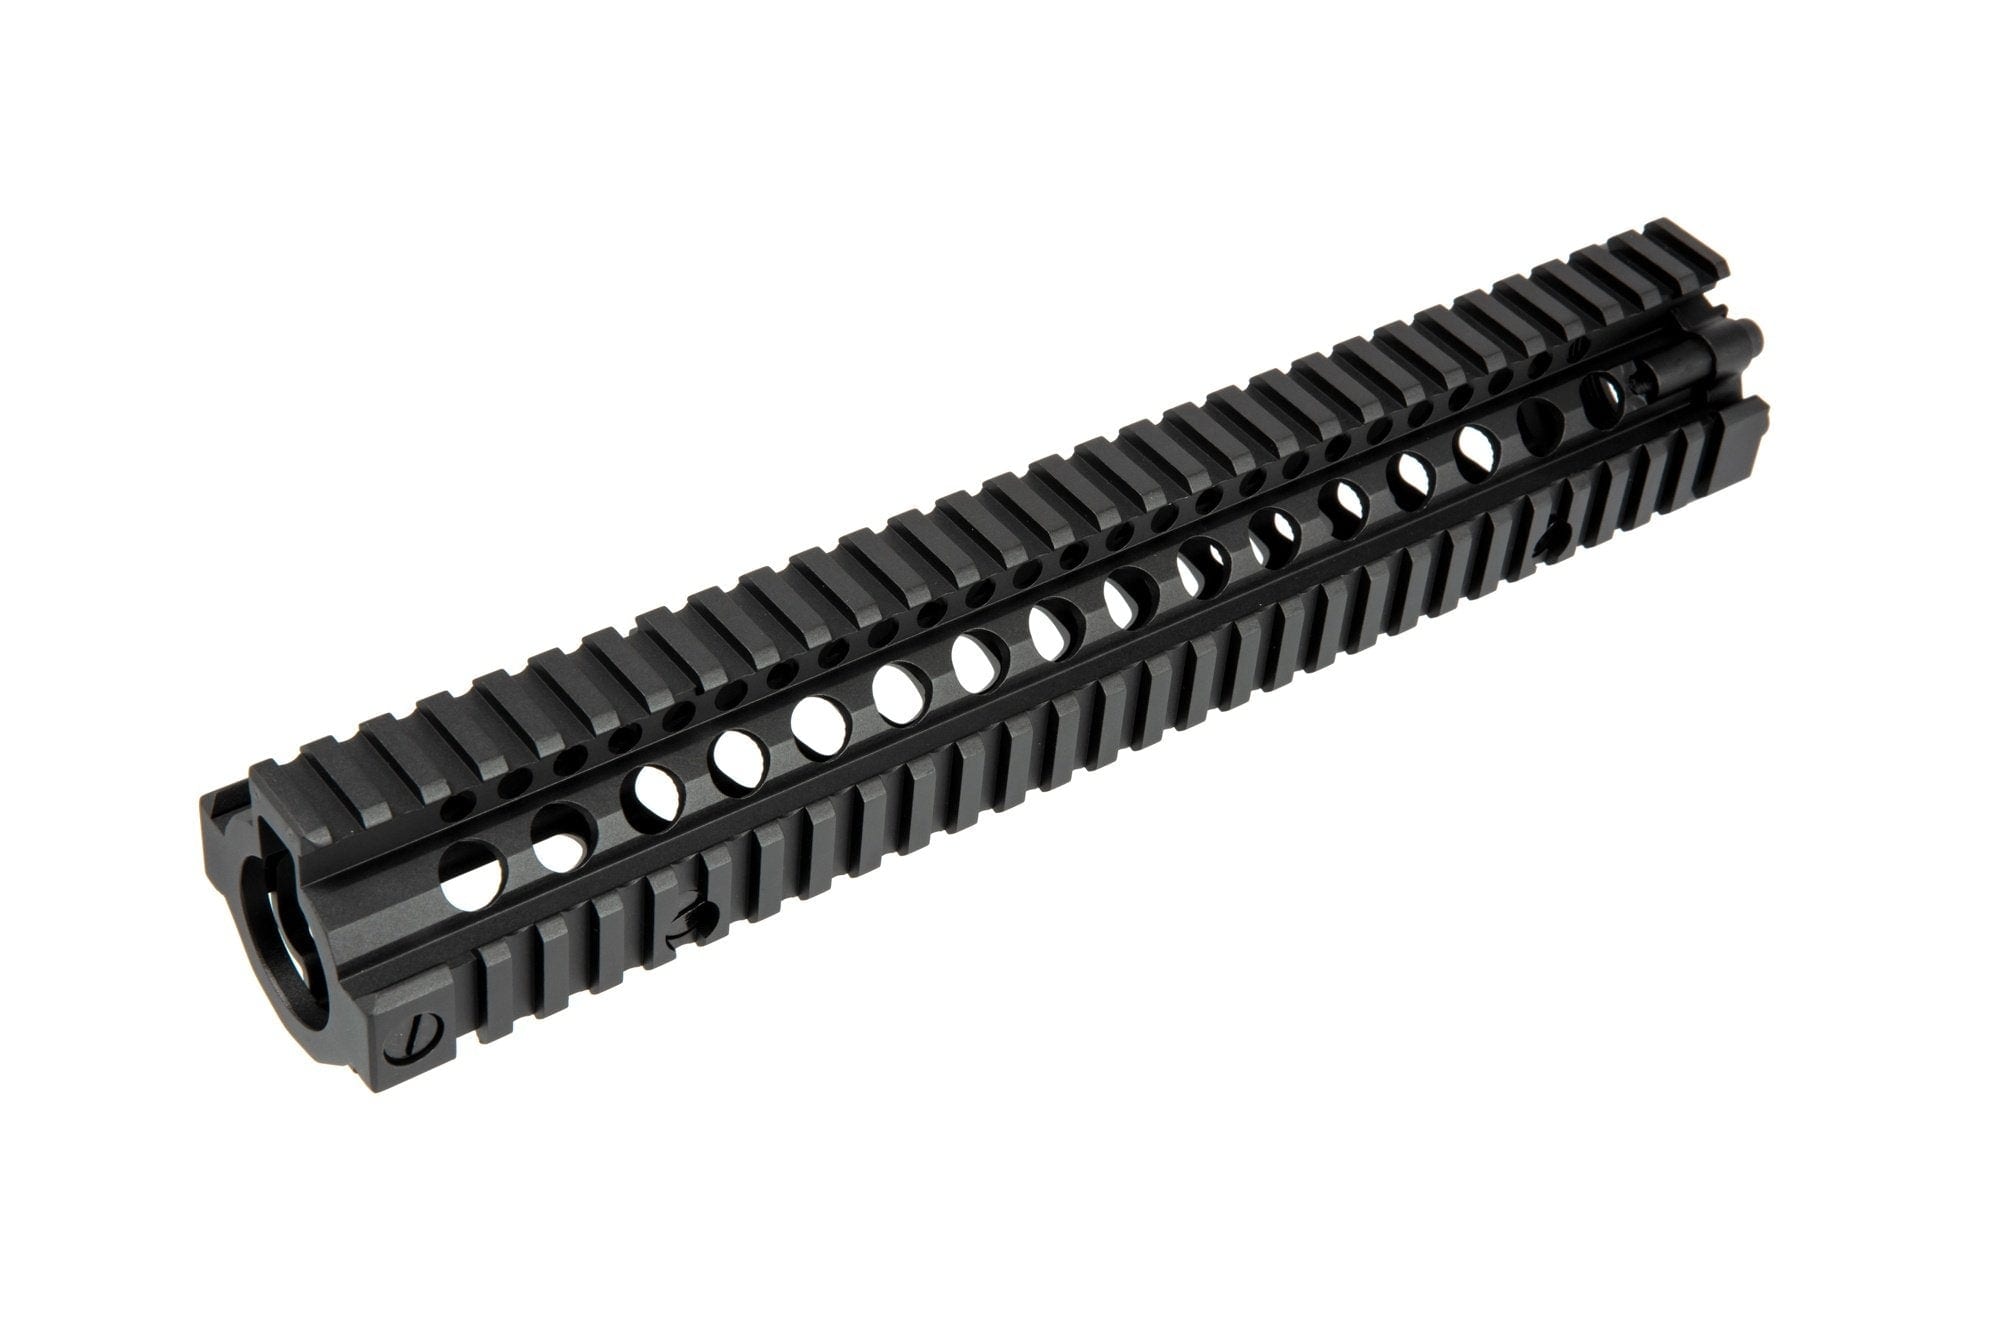 MK18 12" Mounting Rail for M4/M16 by CYMA on Airsoft Mania Europe